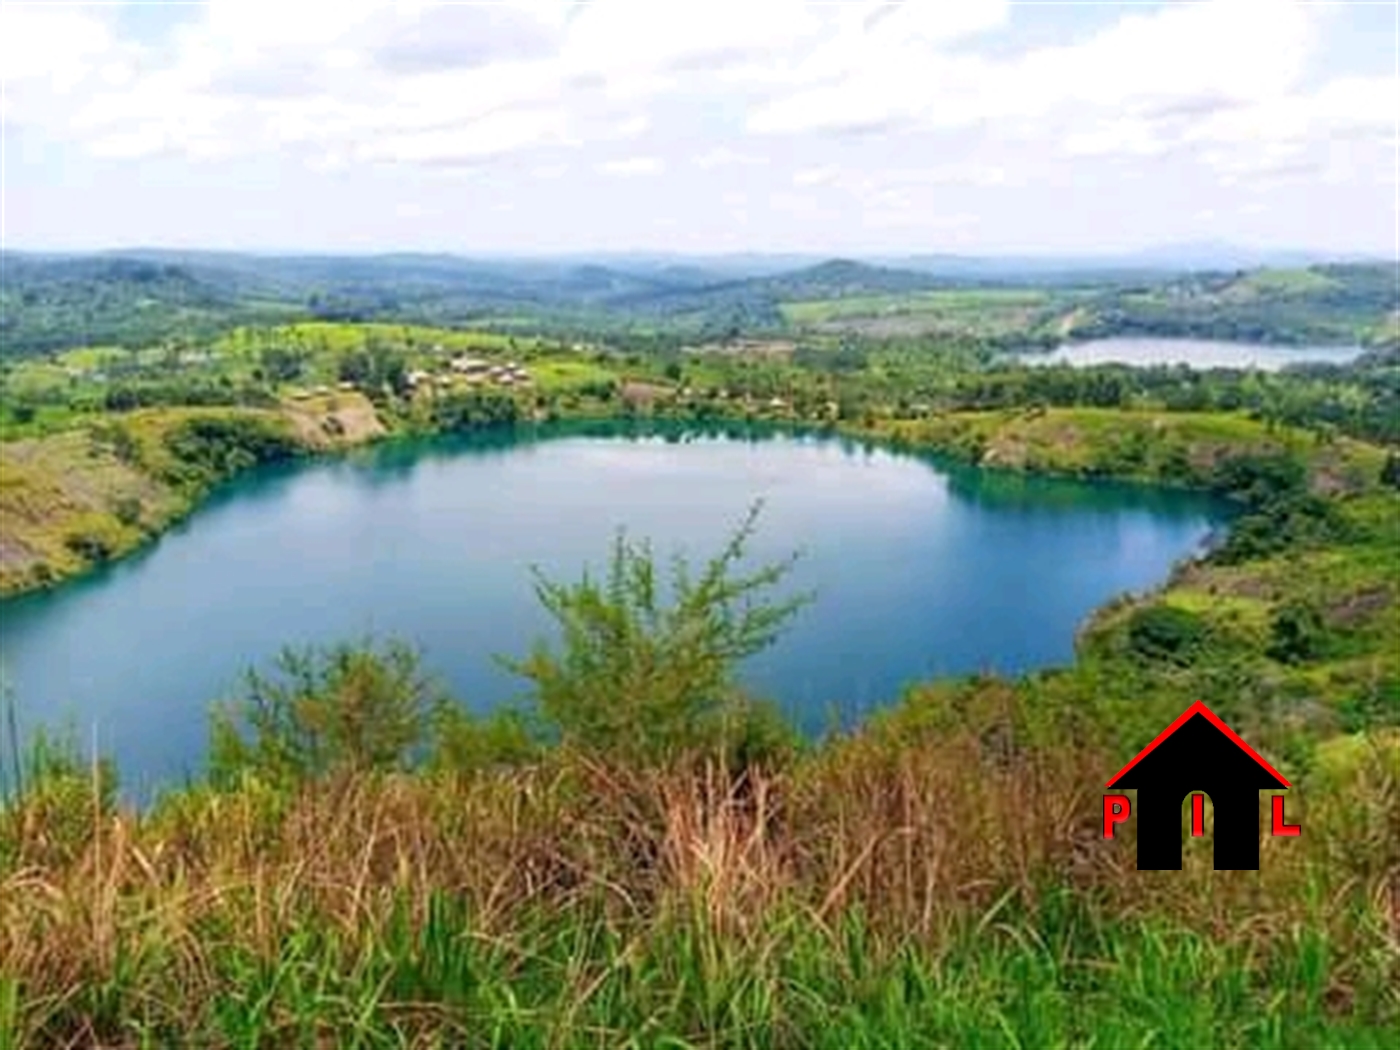 Residential Land for sale in Fortportal Kabaale